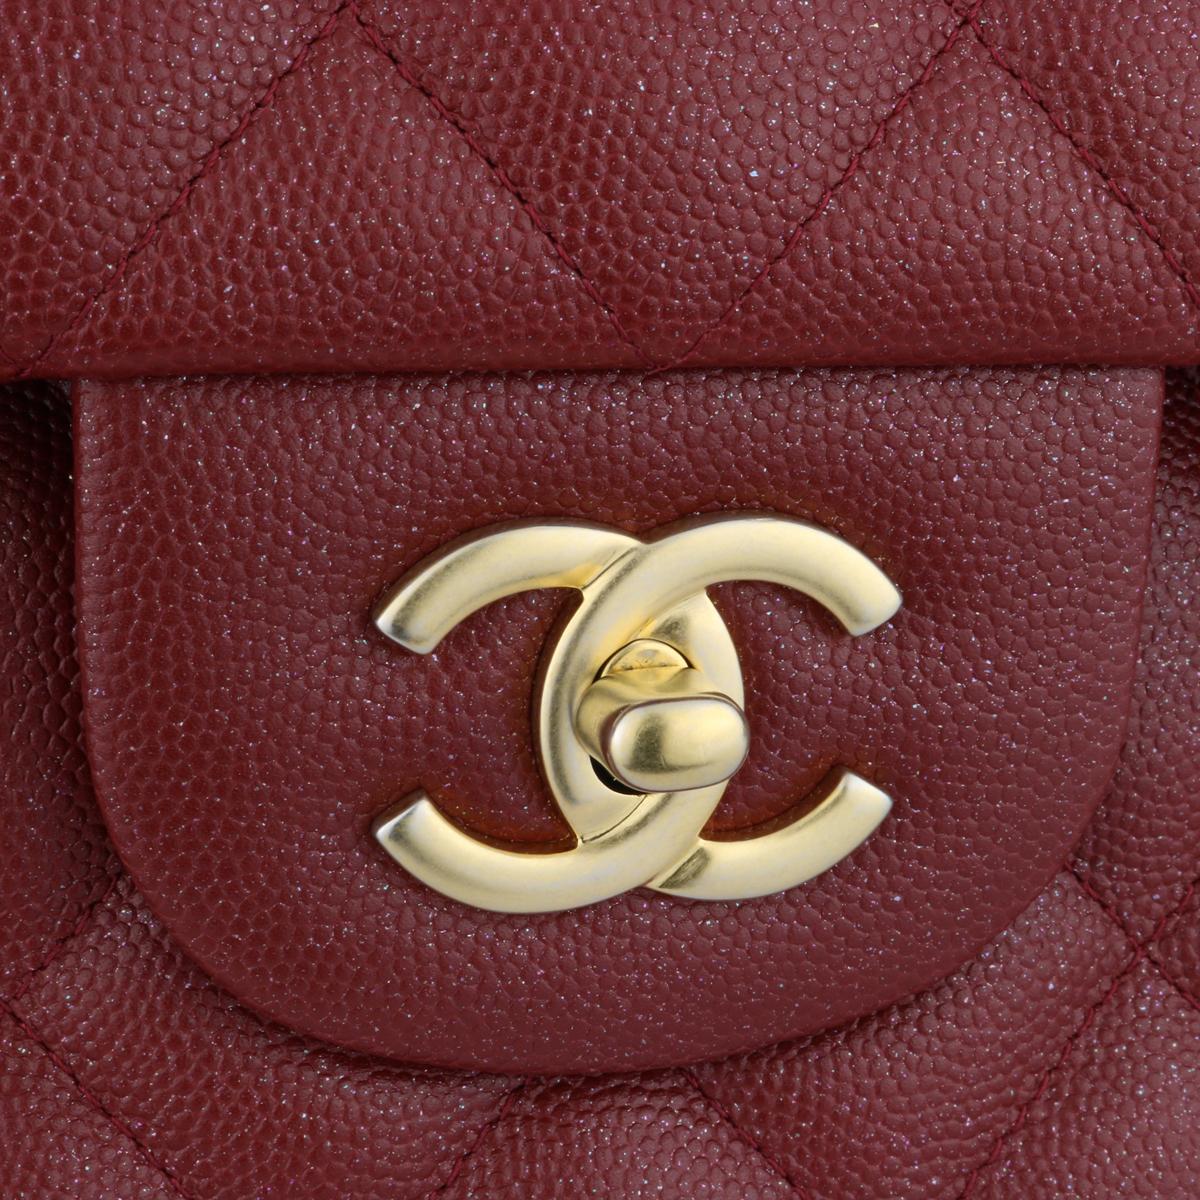 Authentic CHANEL Classic Double Flap Jumbo Bag Iridescent Burgundy Caviar with Brushed Gold Hardware 2018.

This stunning bag is in pristine condition, the bag still holds its original shape, and the hardware is still very shiny.

- Exterior